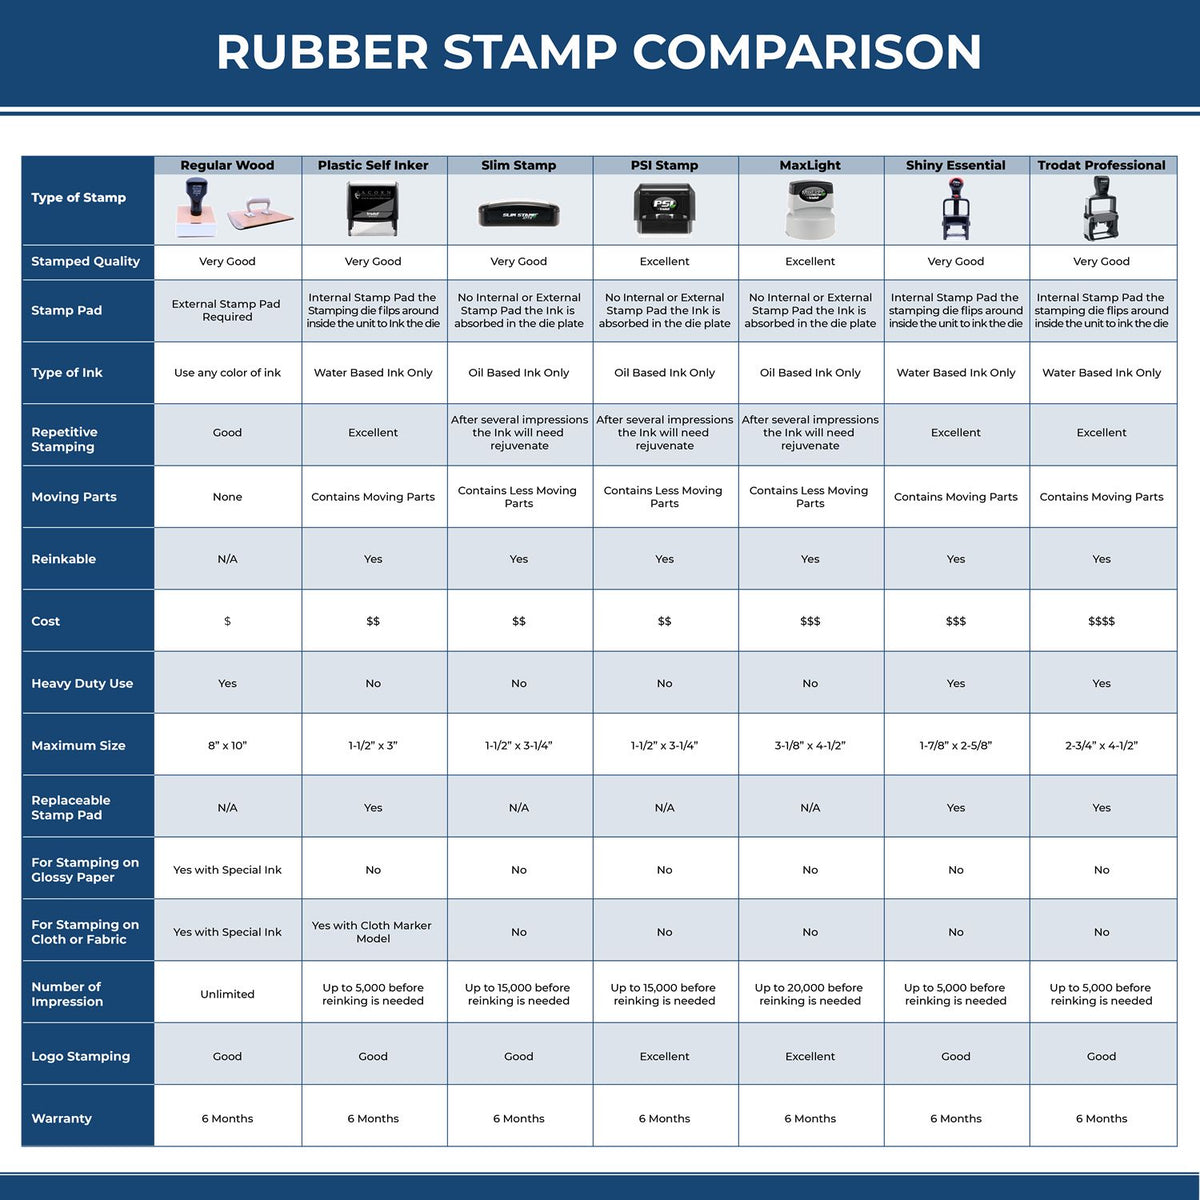 A comparison chart for the different types of mount models available for the Wooden Handle Vermont State Seal Notary Public Stamp.